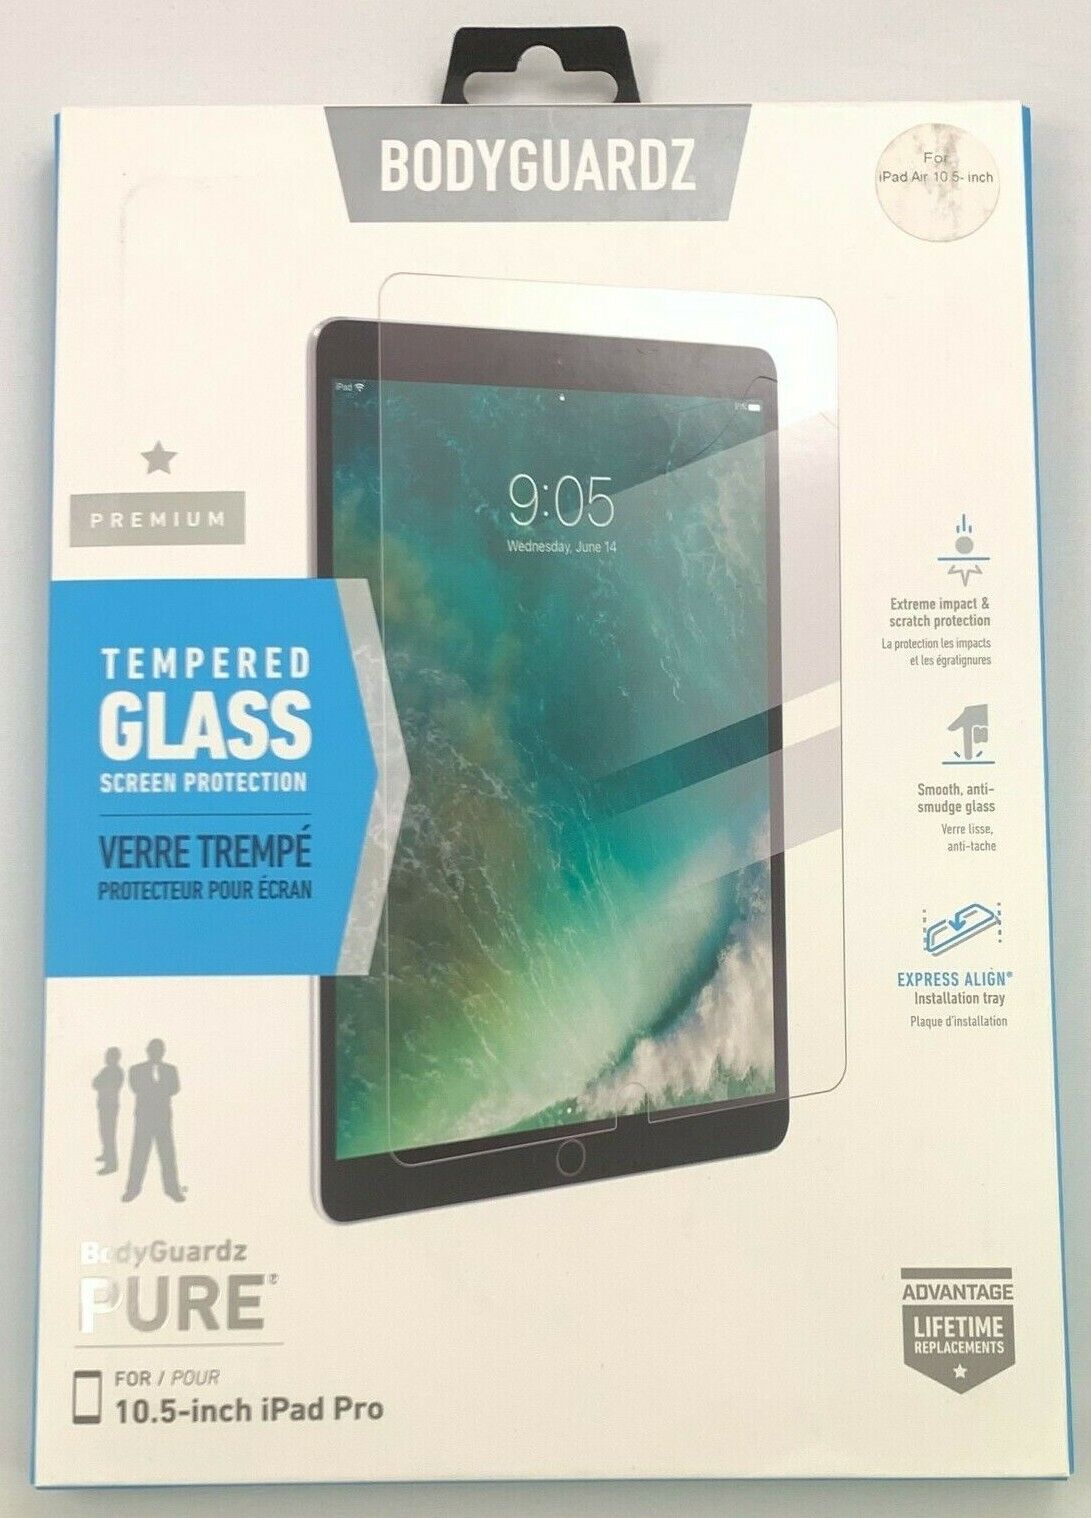 BodyGuardz Pure Tempered Glass Screen Protector for iPad pro/air 10.5 - NEW 